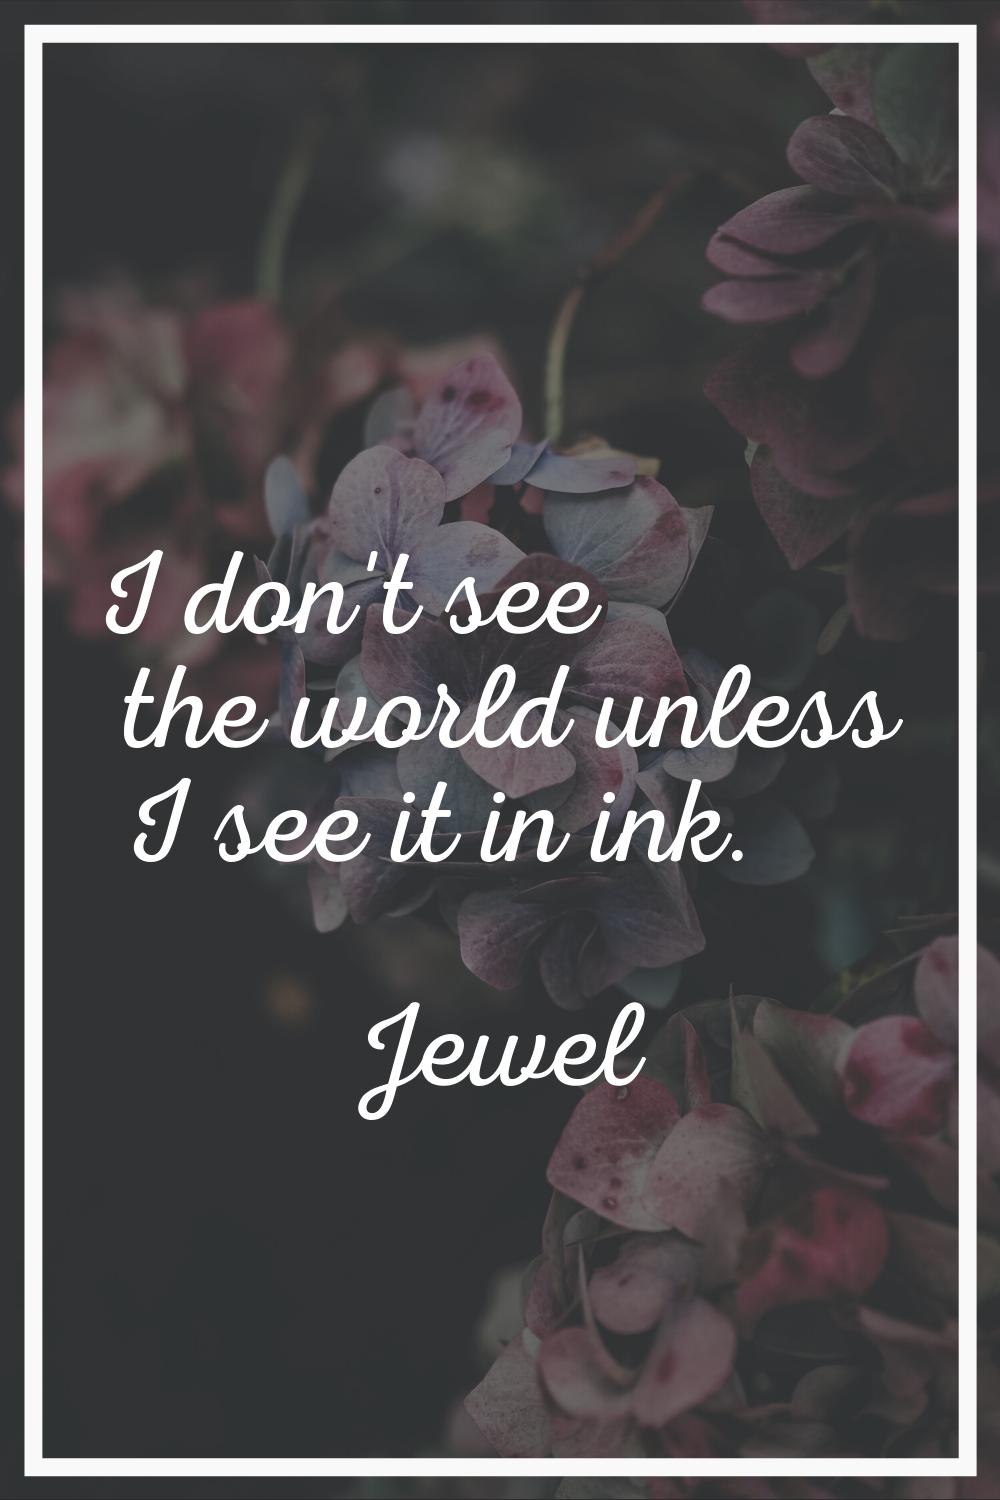 I don't see the world unless I see it in ink.